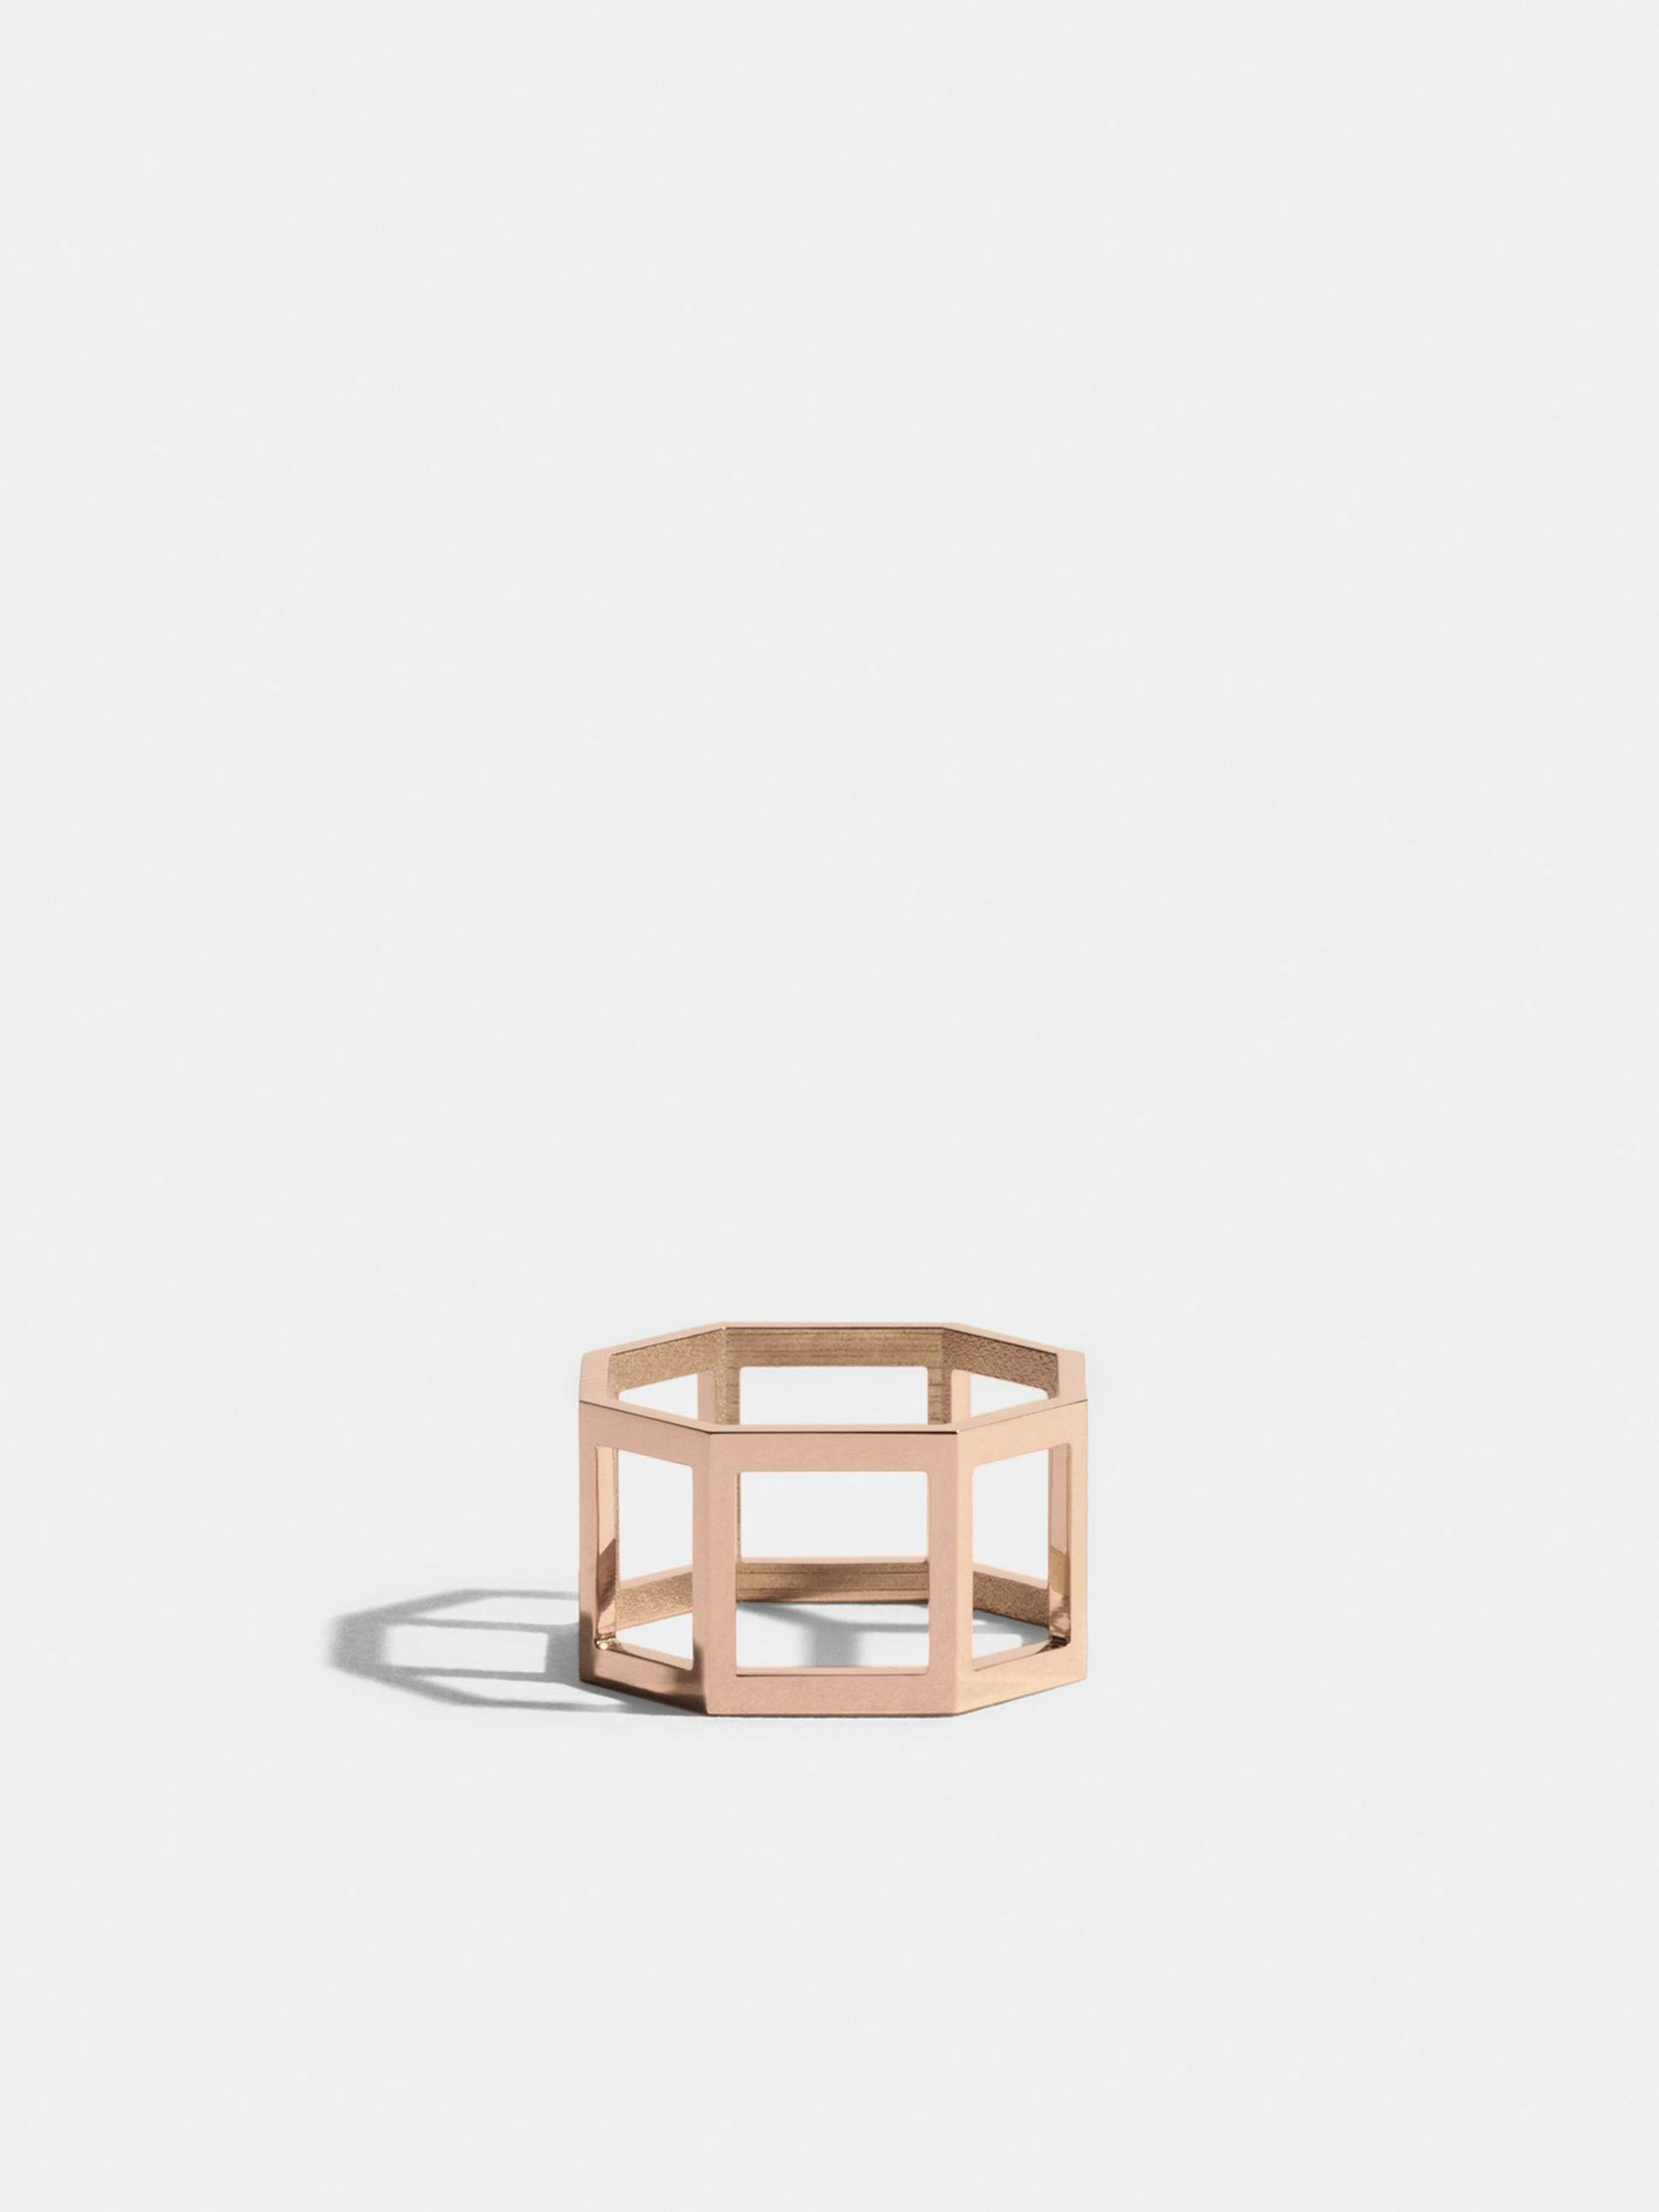 Octogone structured ring in 18k Fairmined ethical rose gold (11mm)